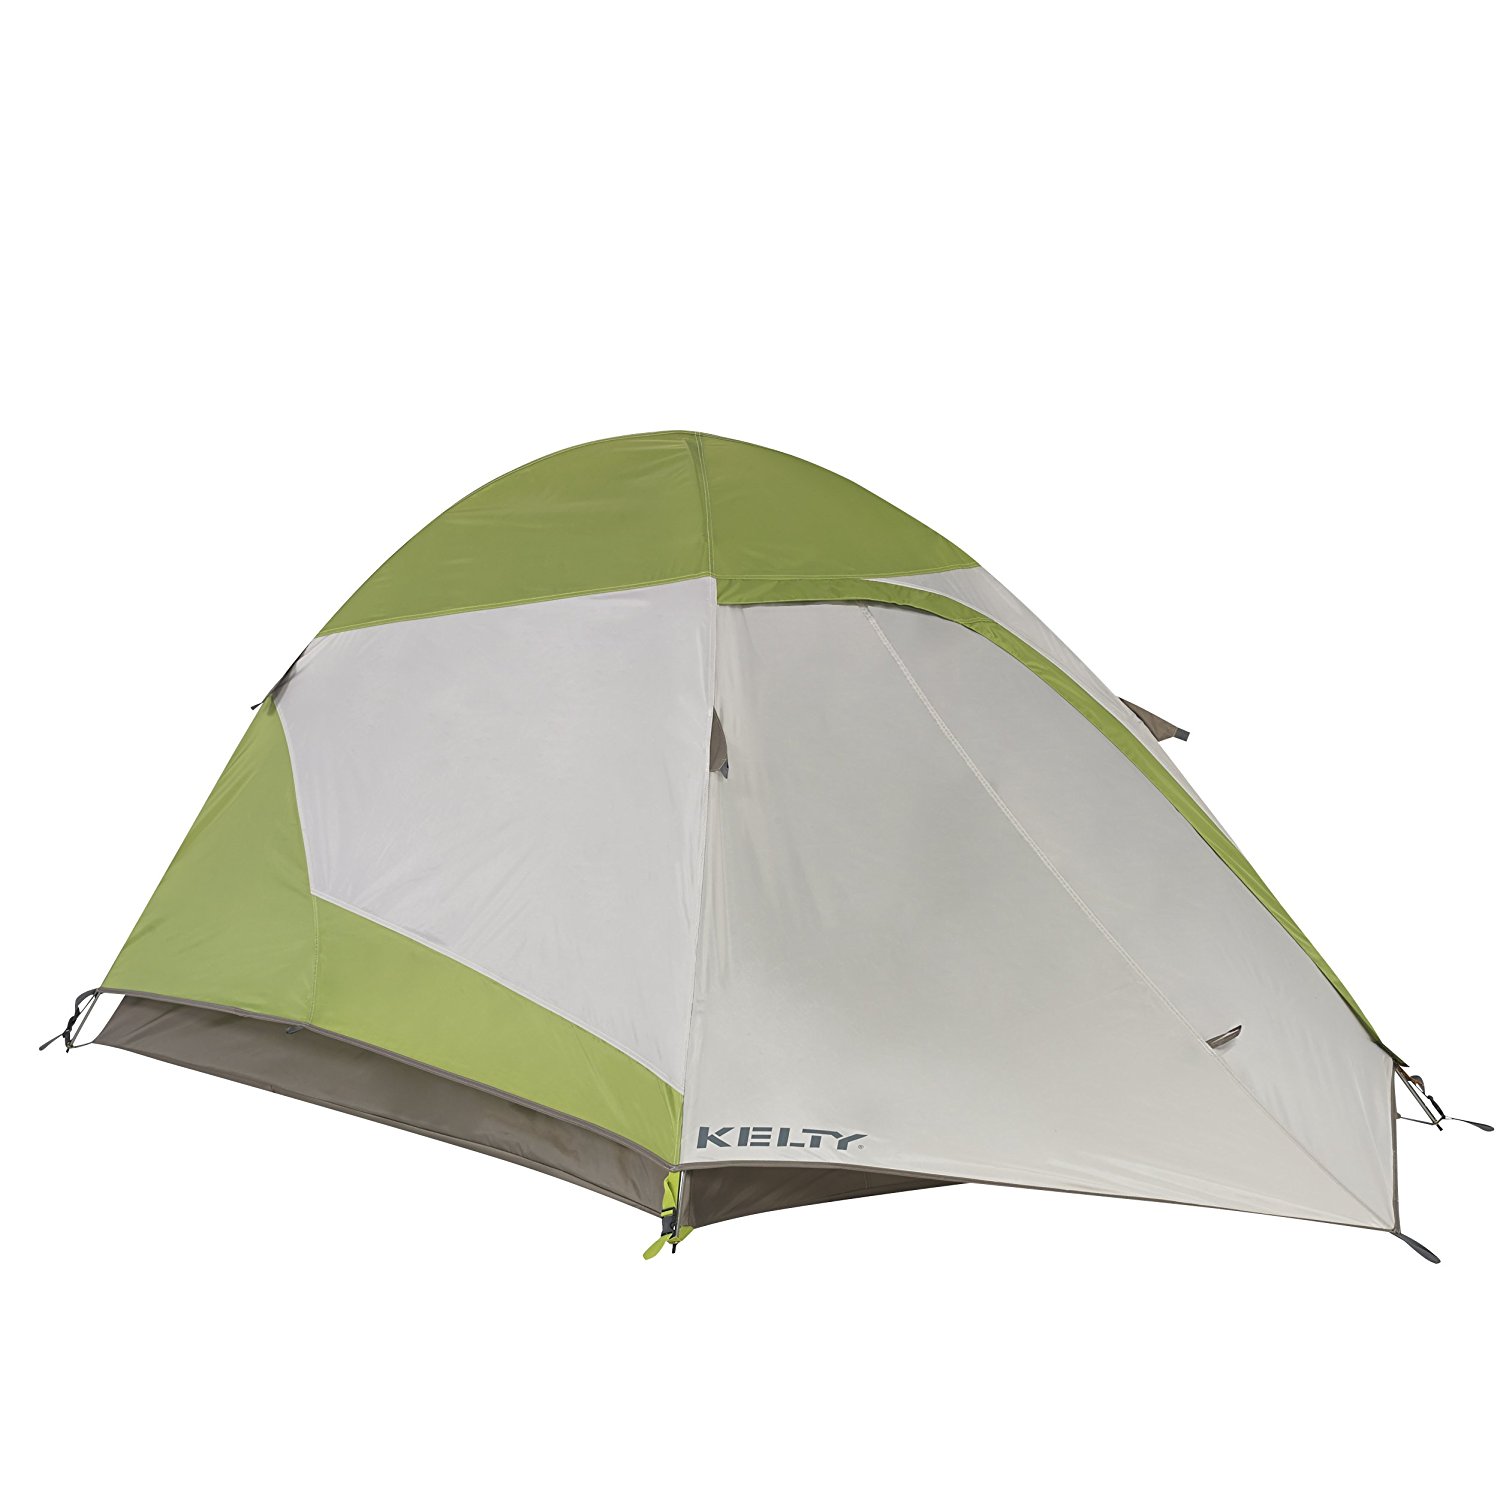 AIOIAI Grand Mesa Tent – 2 to 4 Person Camping and Backpacking Tents